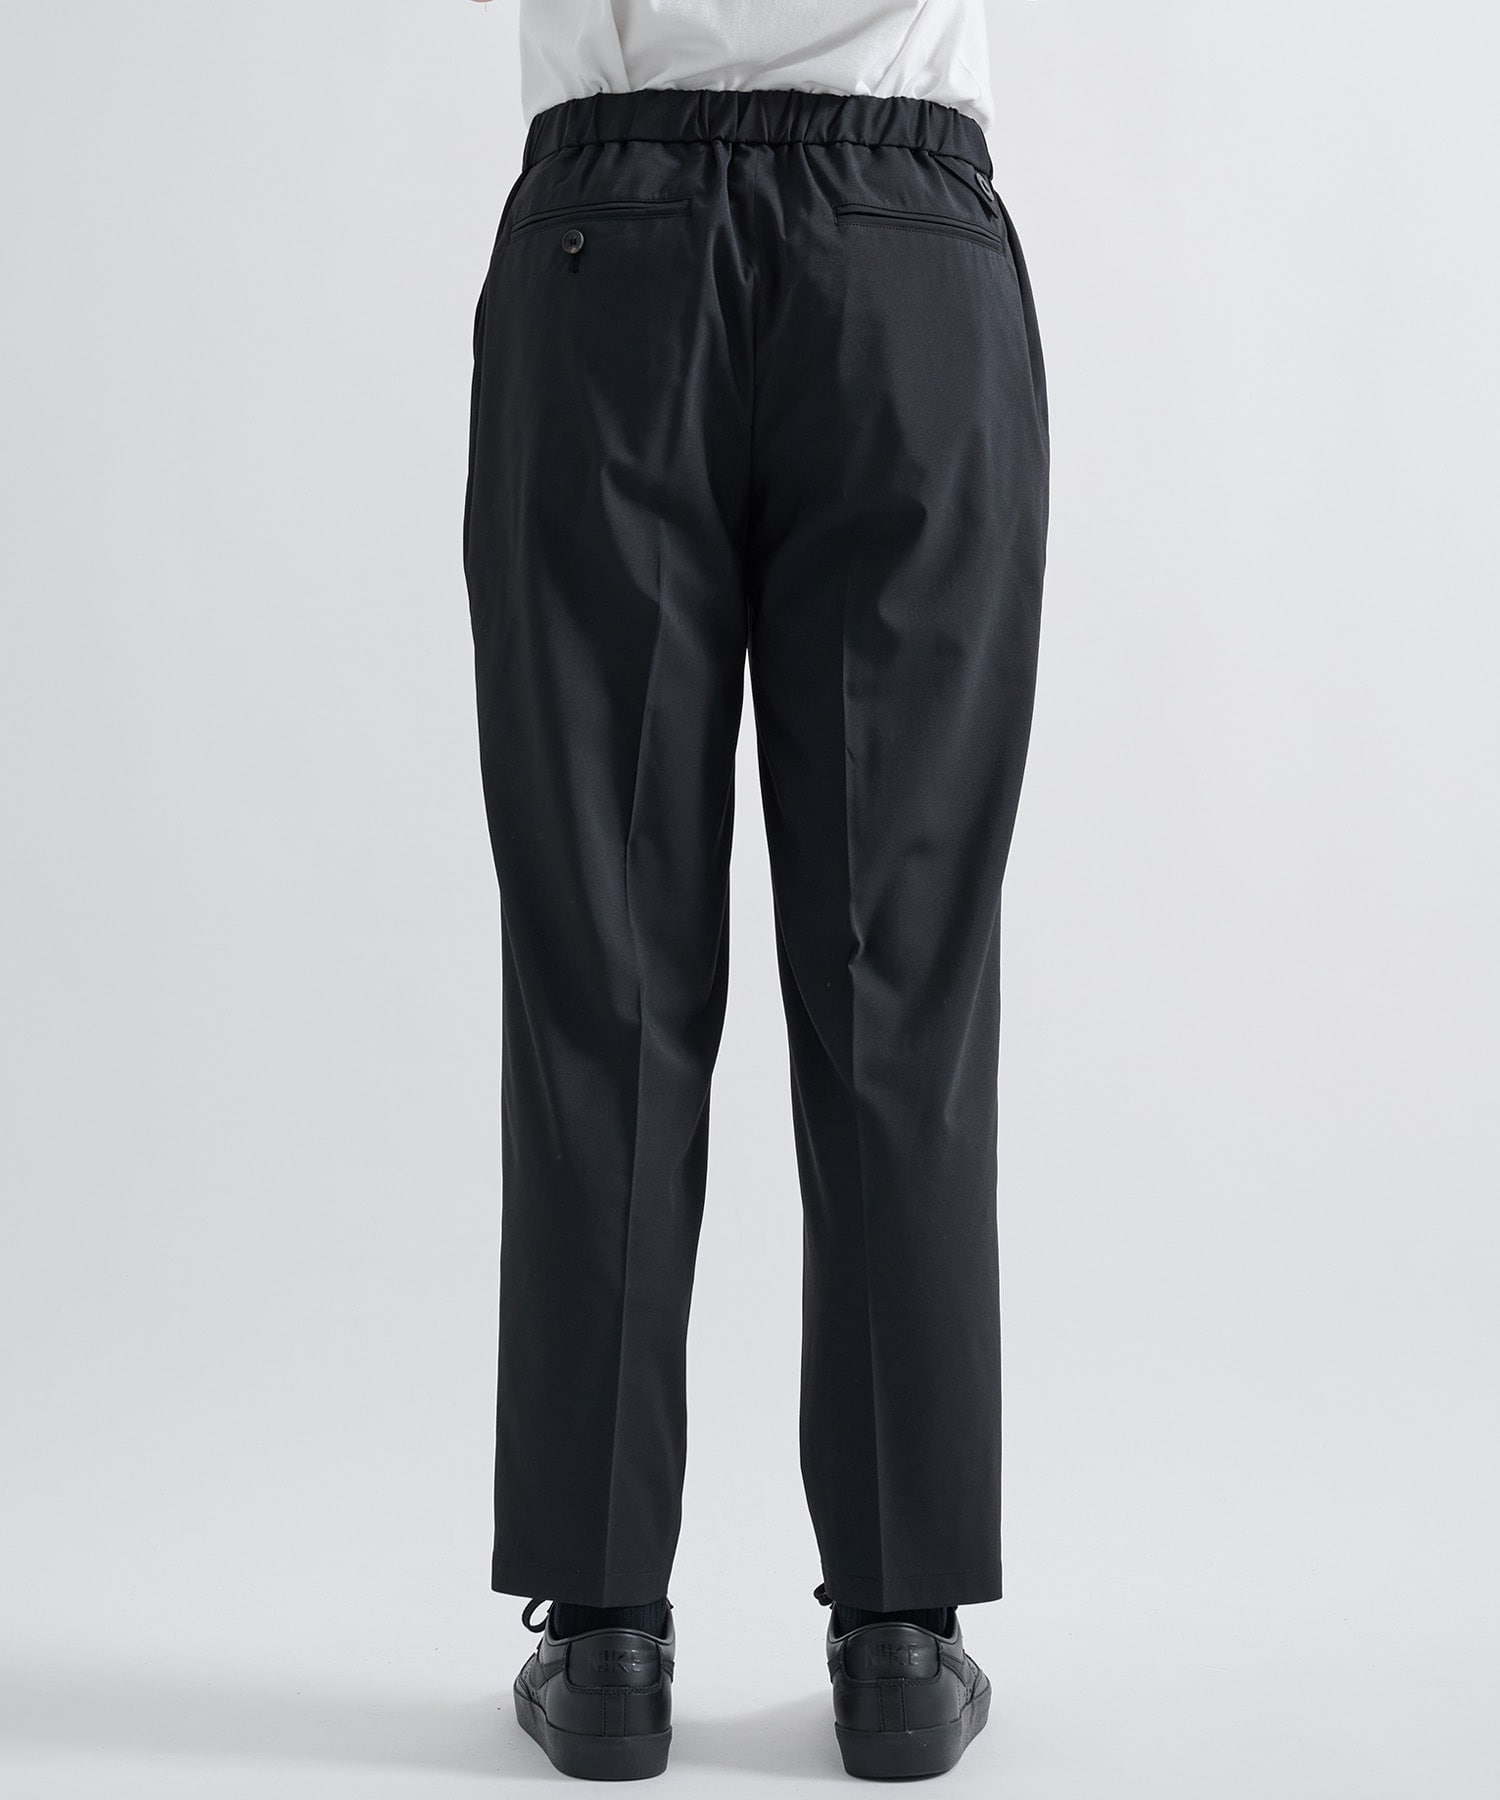 1TUCK BELTED PANTS White Mountaineering